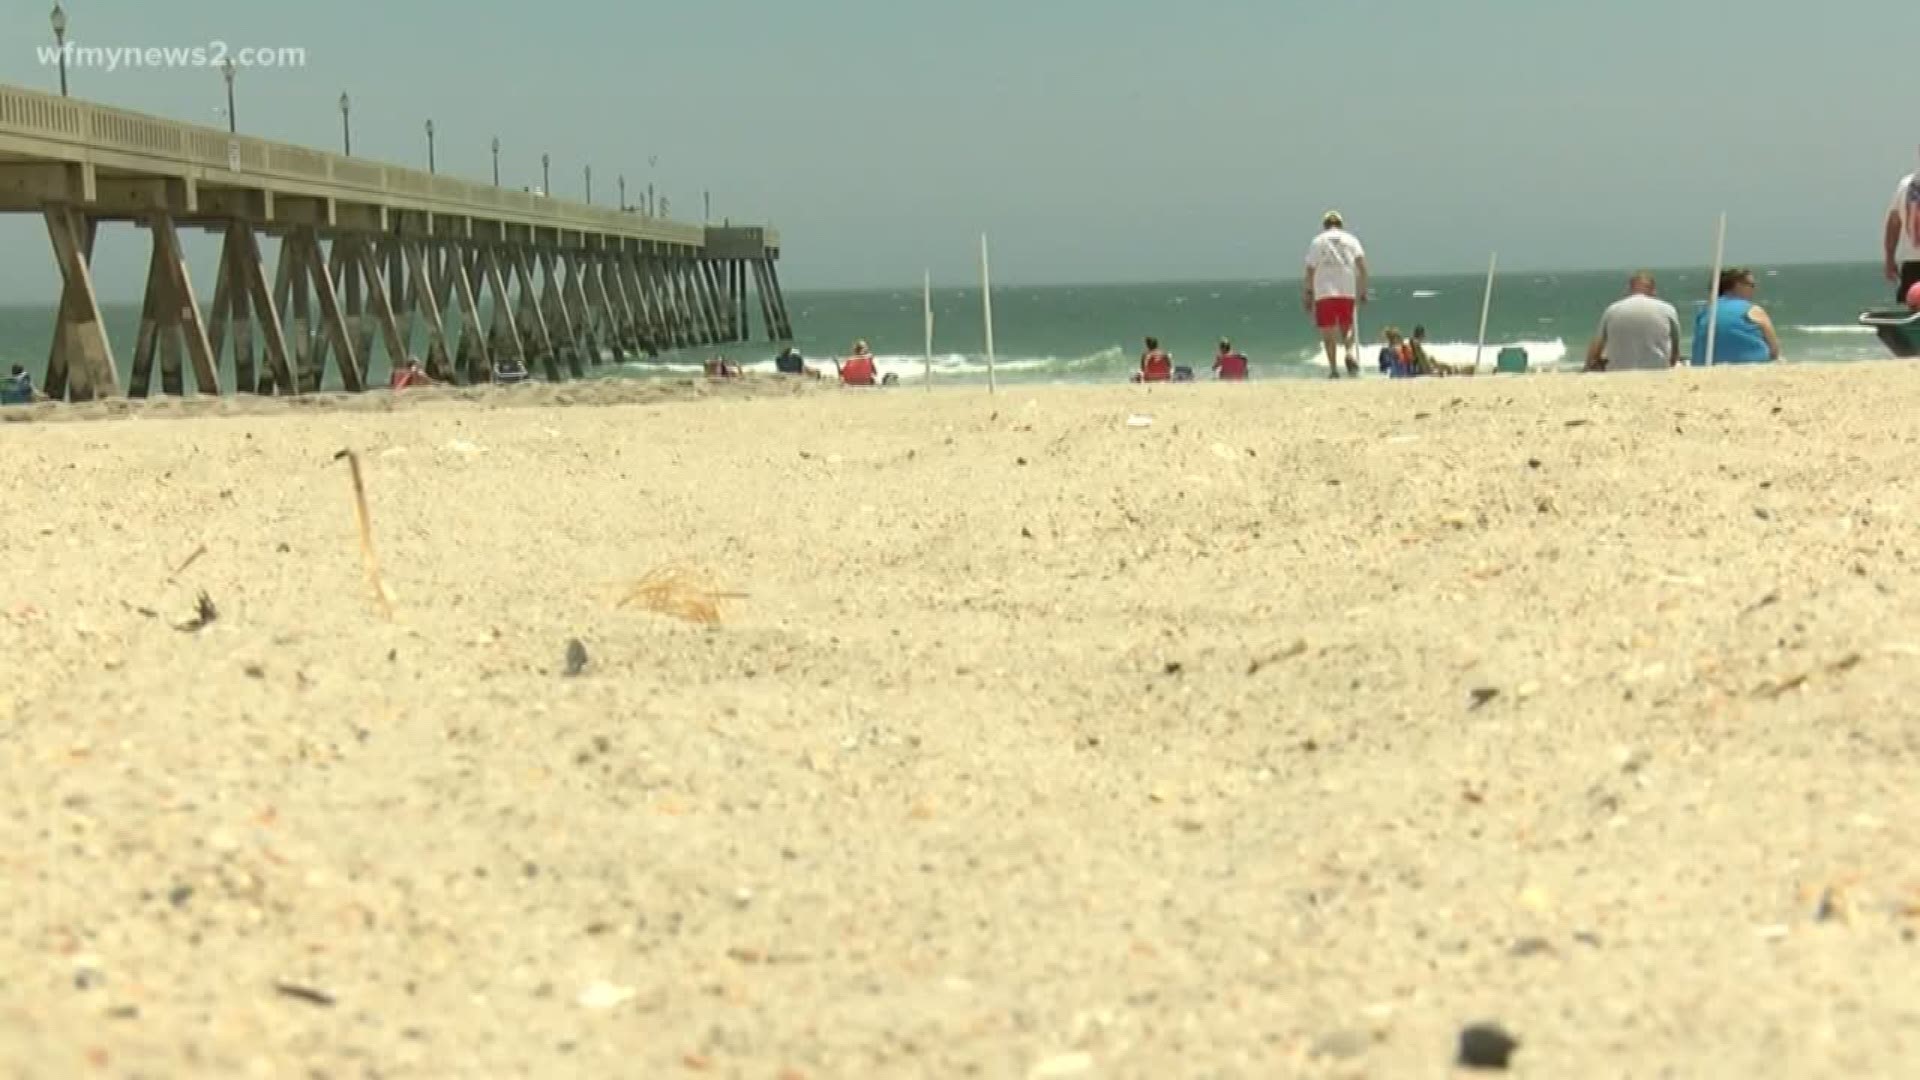 We spoke to one woman who's made it her mission to let others know these deaths are preventable, just one year after her husband died in a rip current.